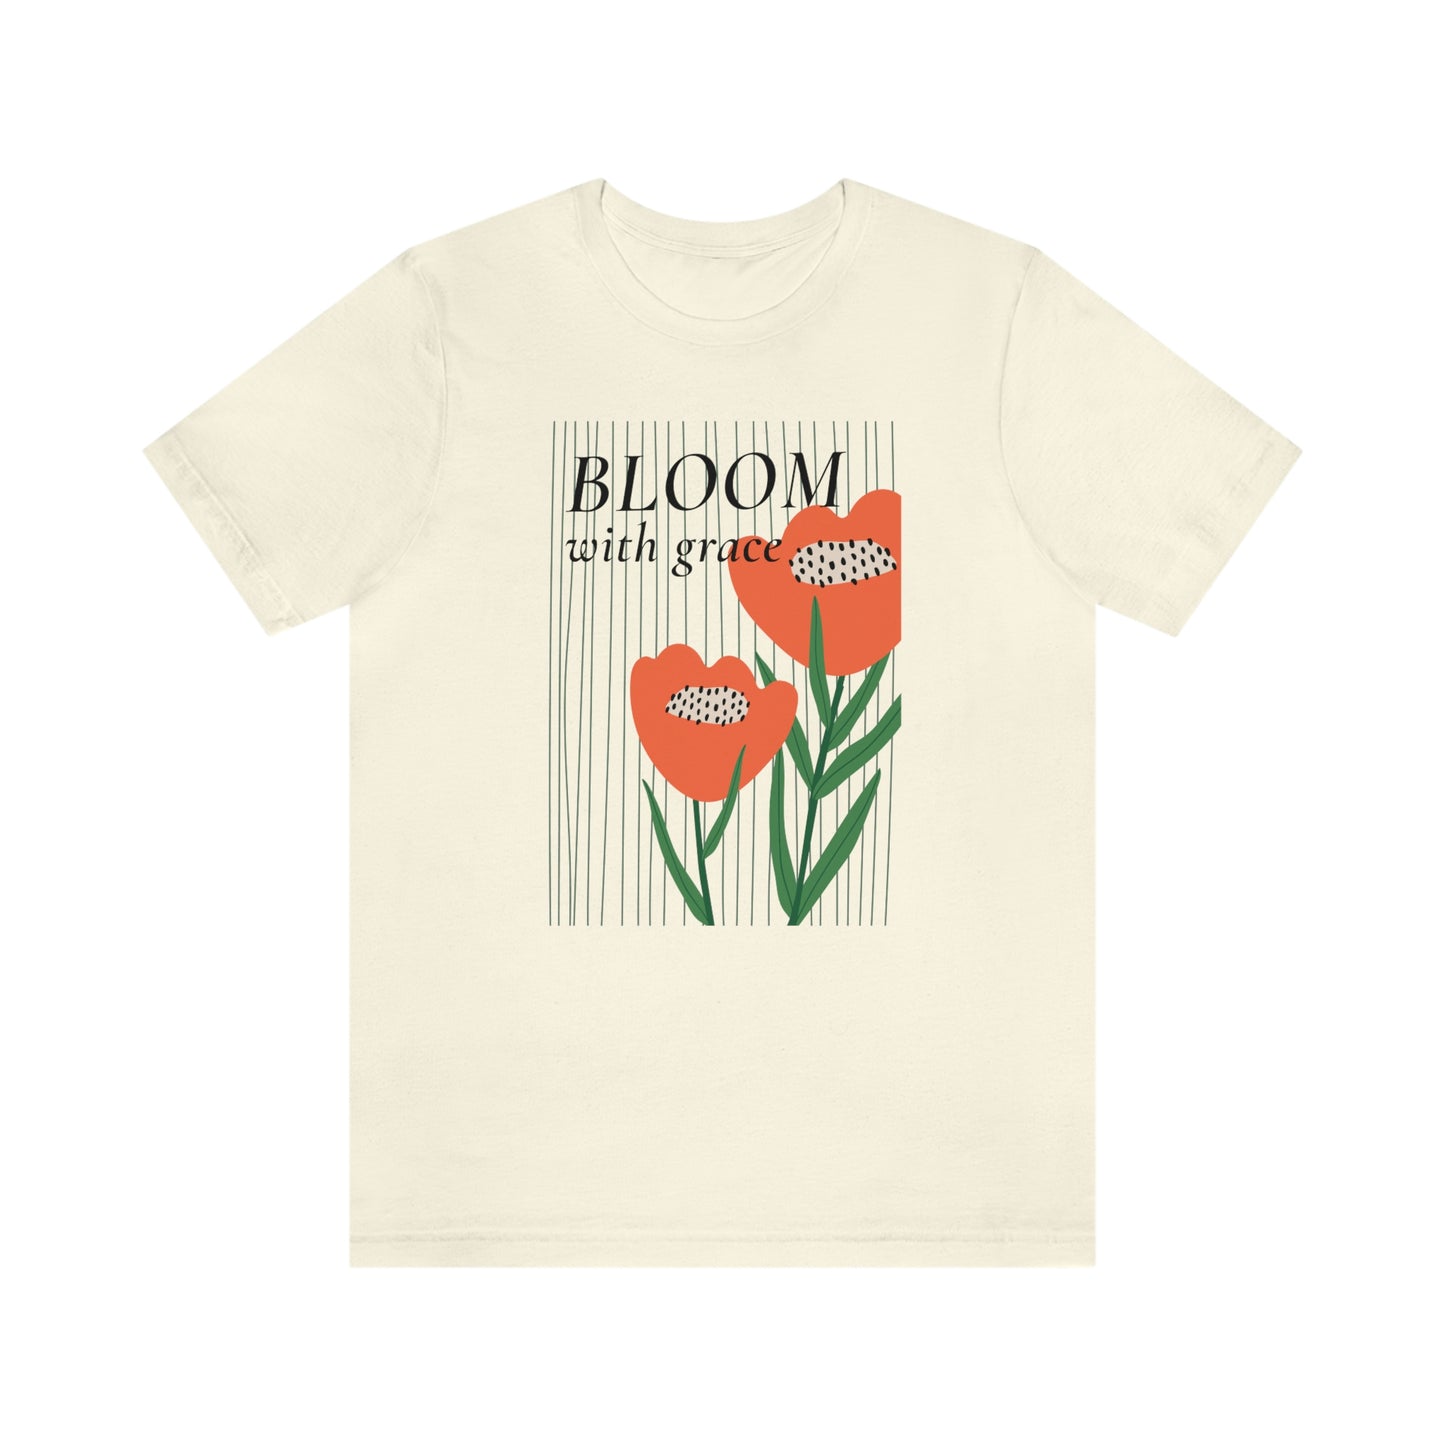 Bloom With Grace - Unisex T-Shirt